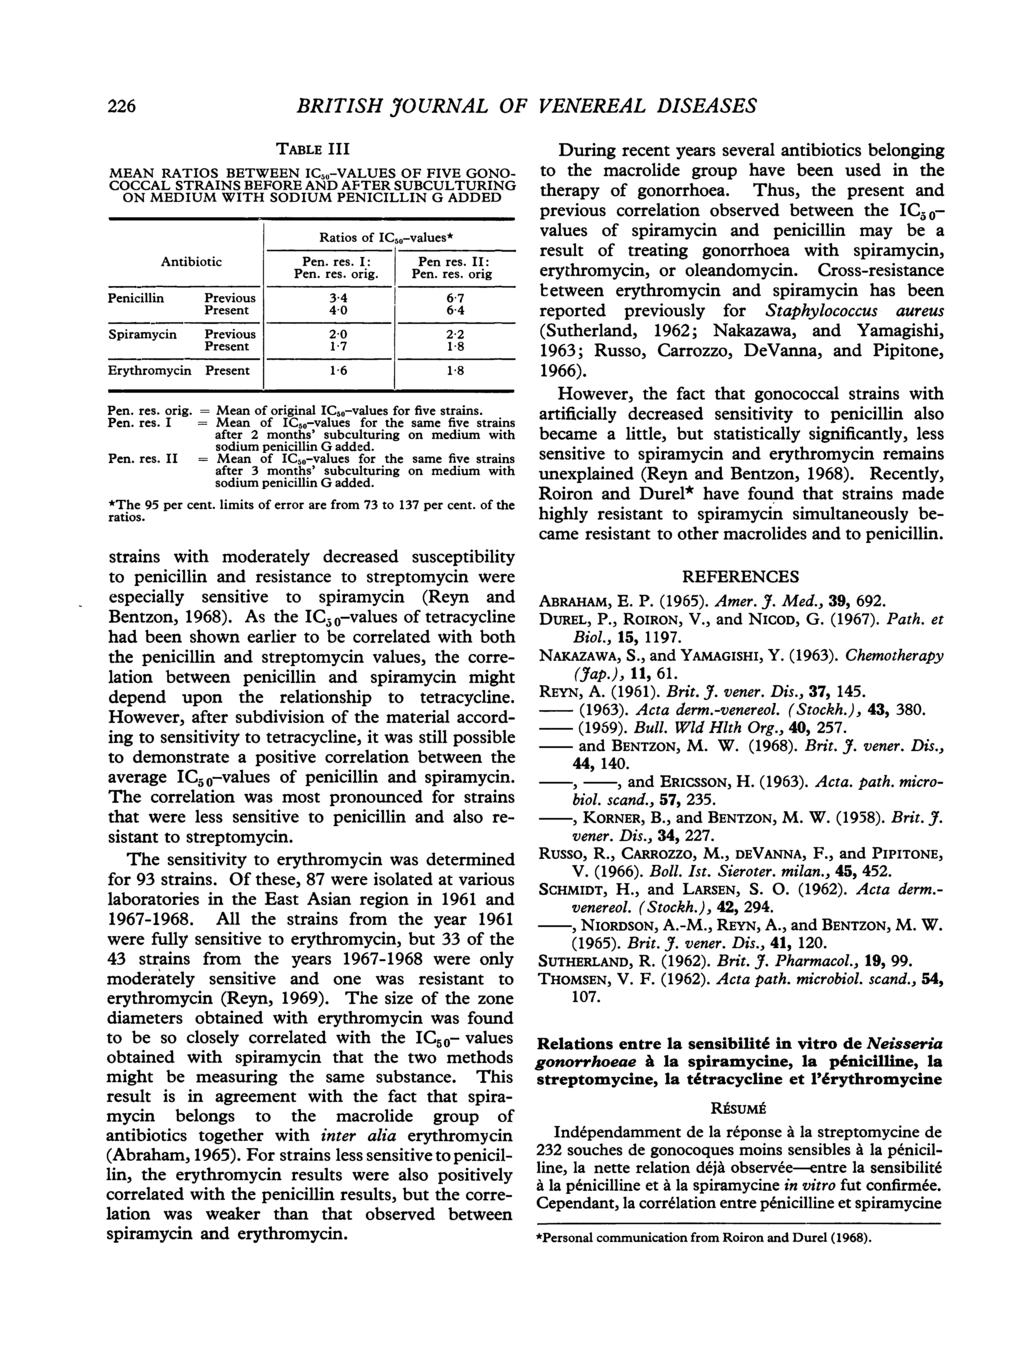 226 BRITISH JOURNAL OF VENEREAL DISEASES TABLE III MEAN RATIOS BETWEEN IC50-VALUES OF FIVE GONO- COCCAL STRAINS BEFORE AND AFTER SUBCULTURING ON MEDIUM WITH SODIUM PENICILLIN G ADDED Ratios of